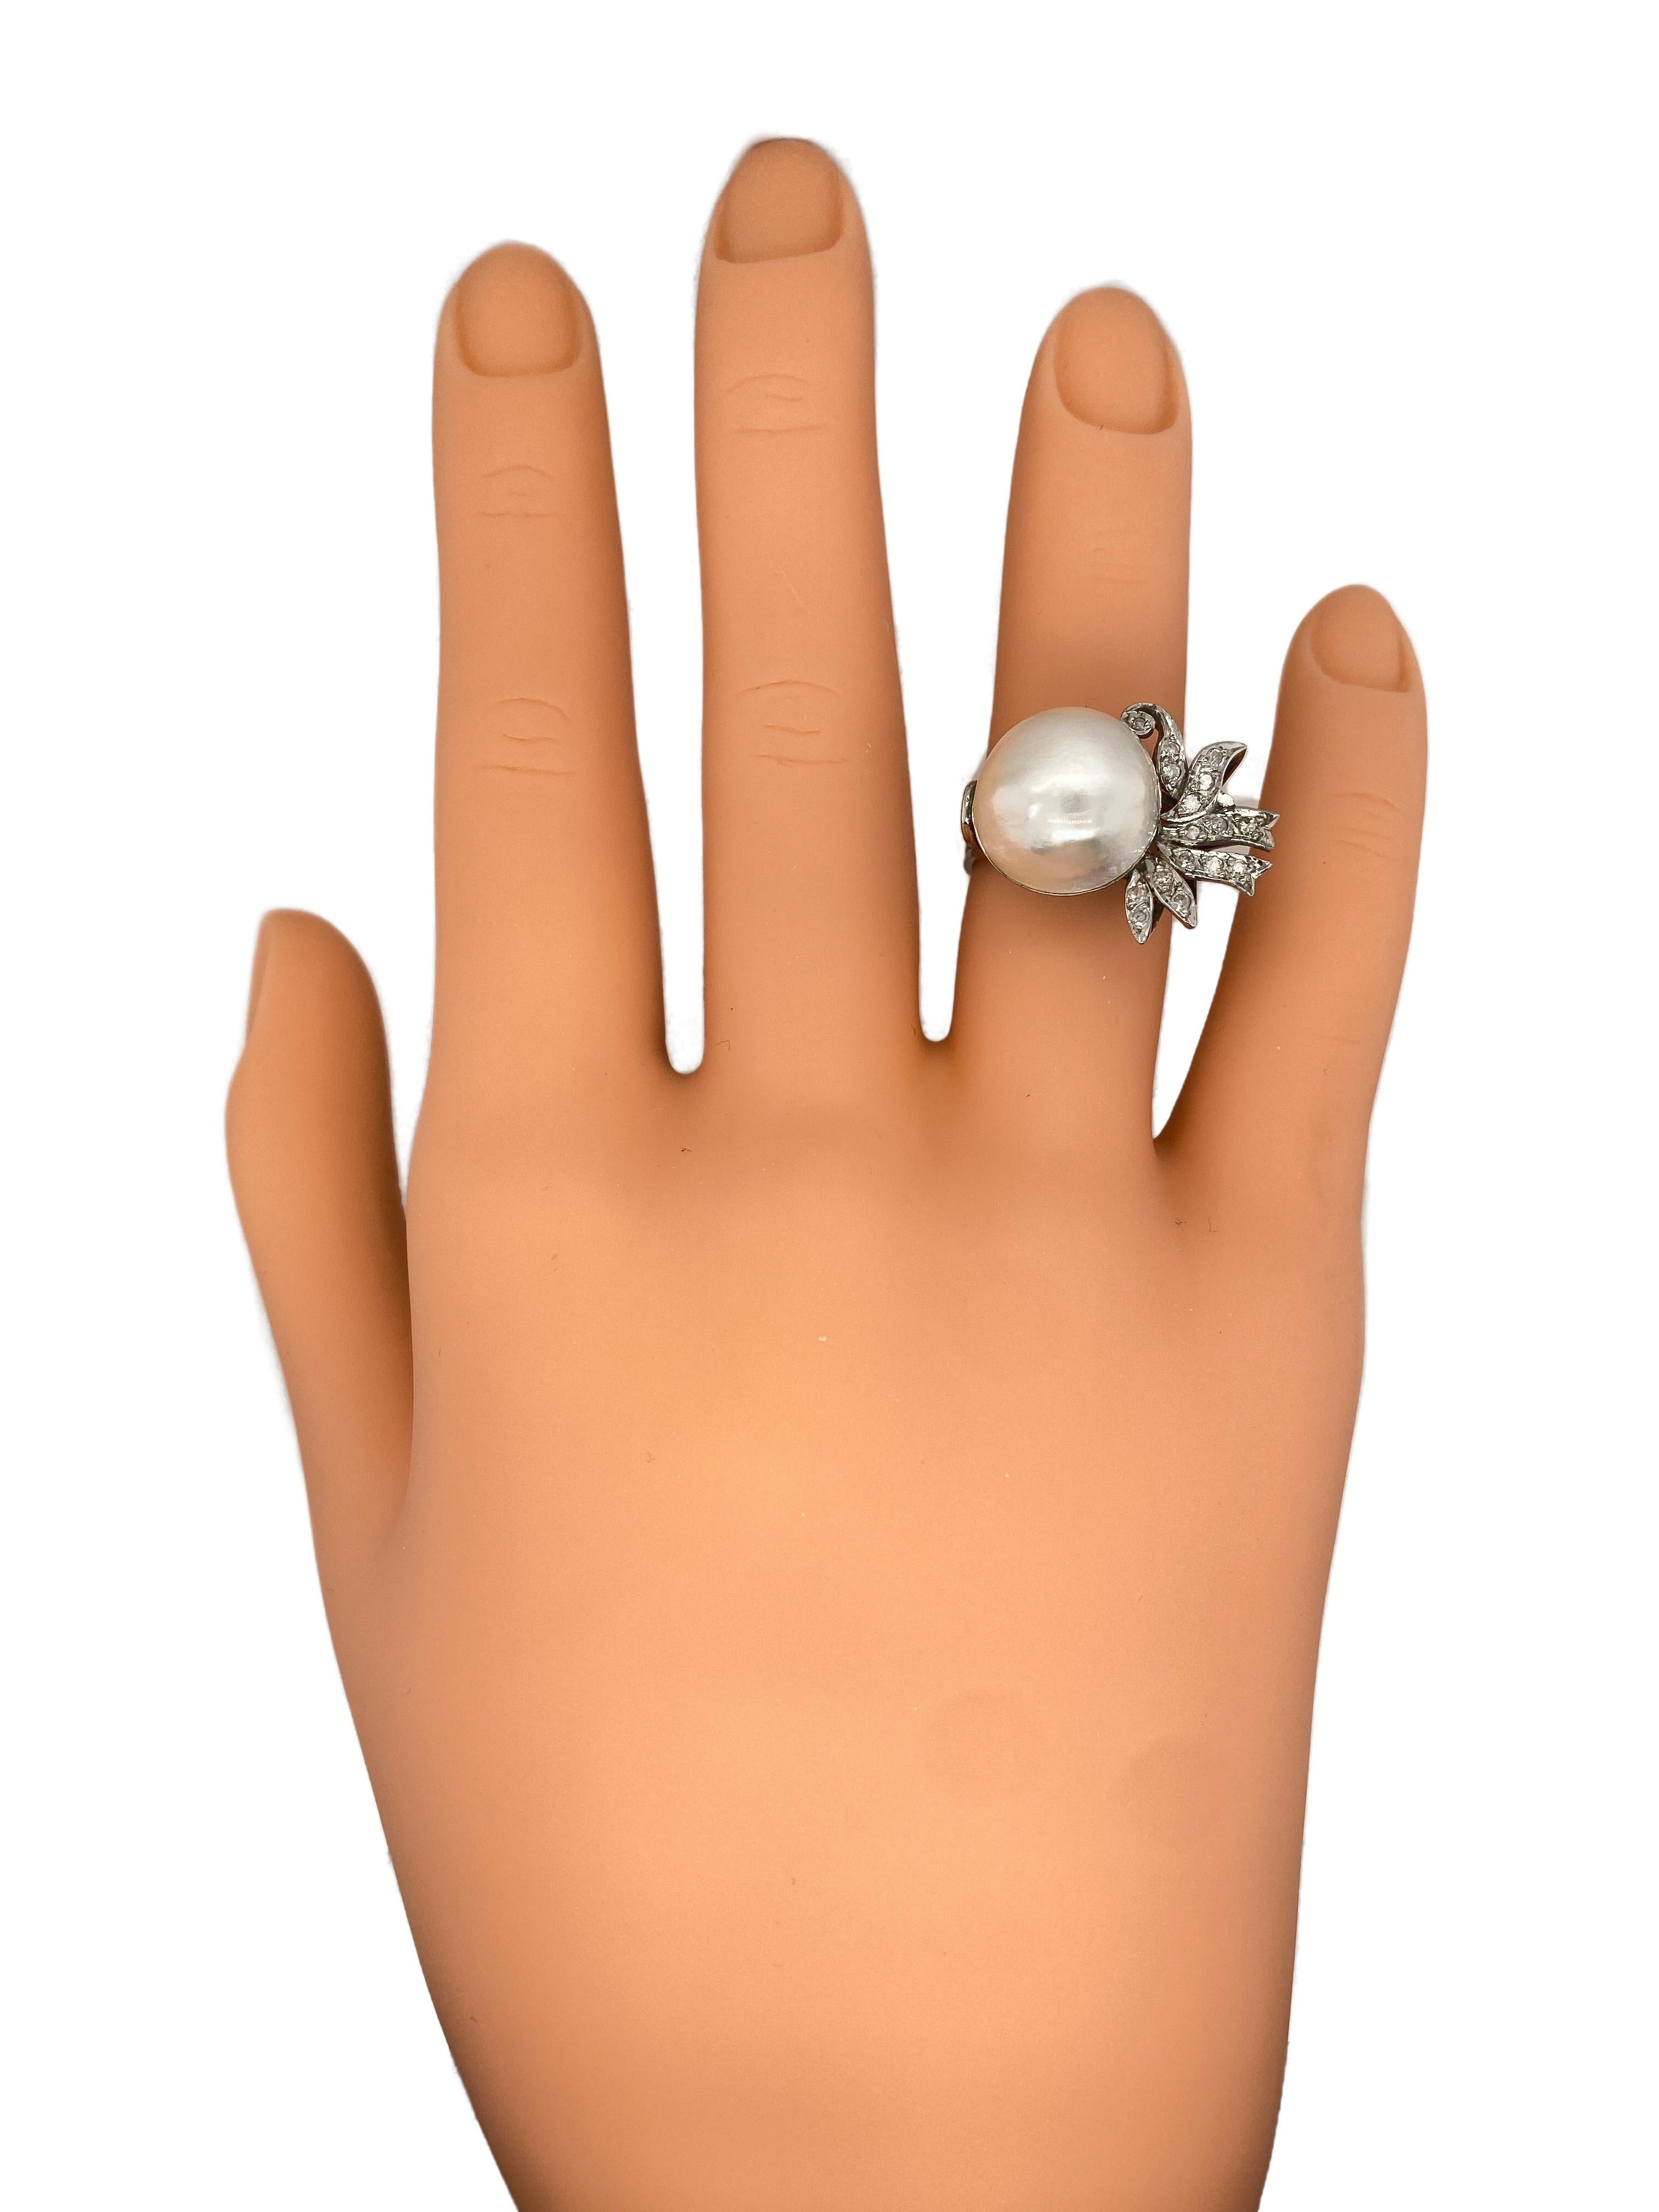 Women's 1930s Mabe Pearl and Diamond Ring in Platinum and 14 Karat White Gold